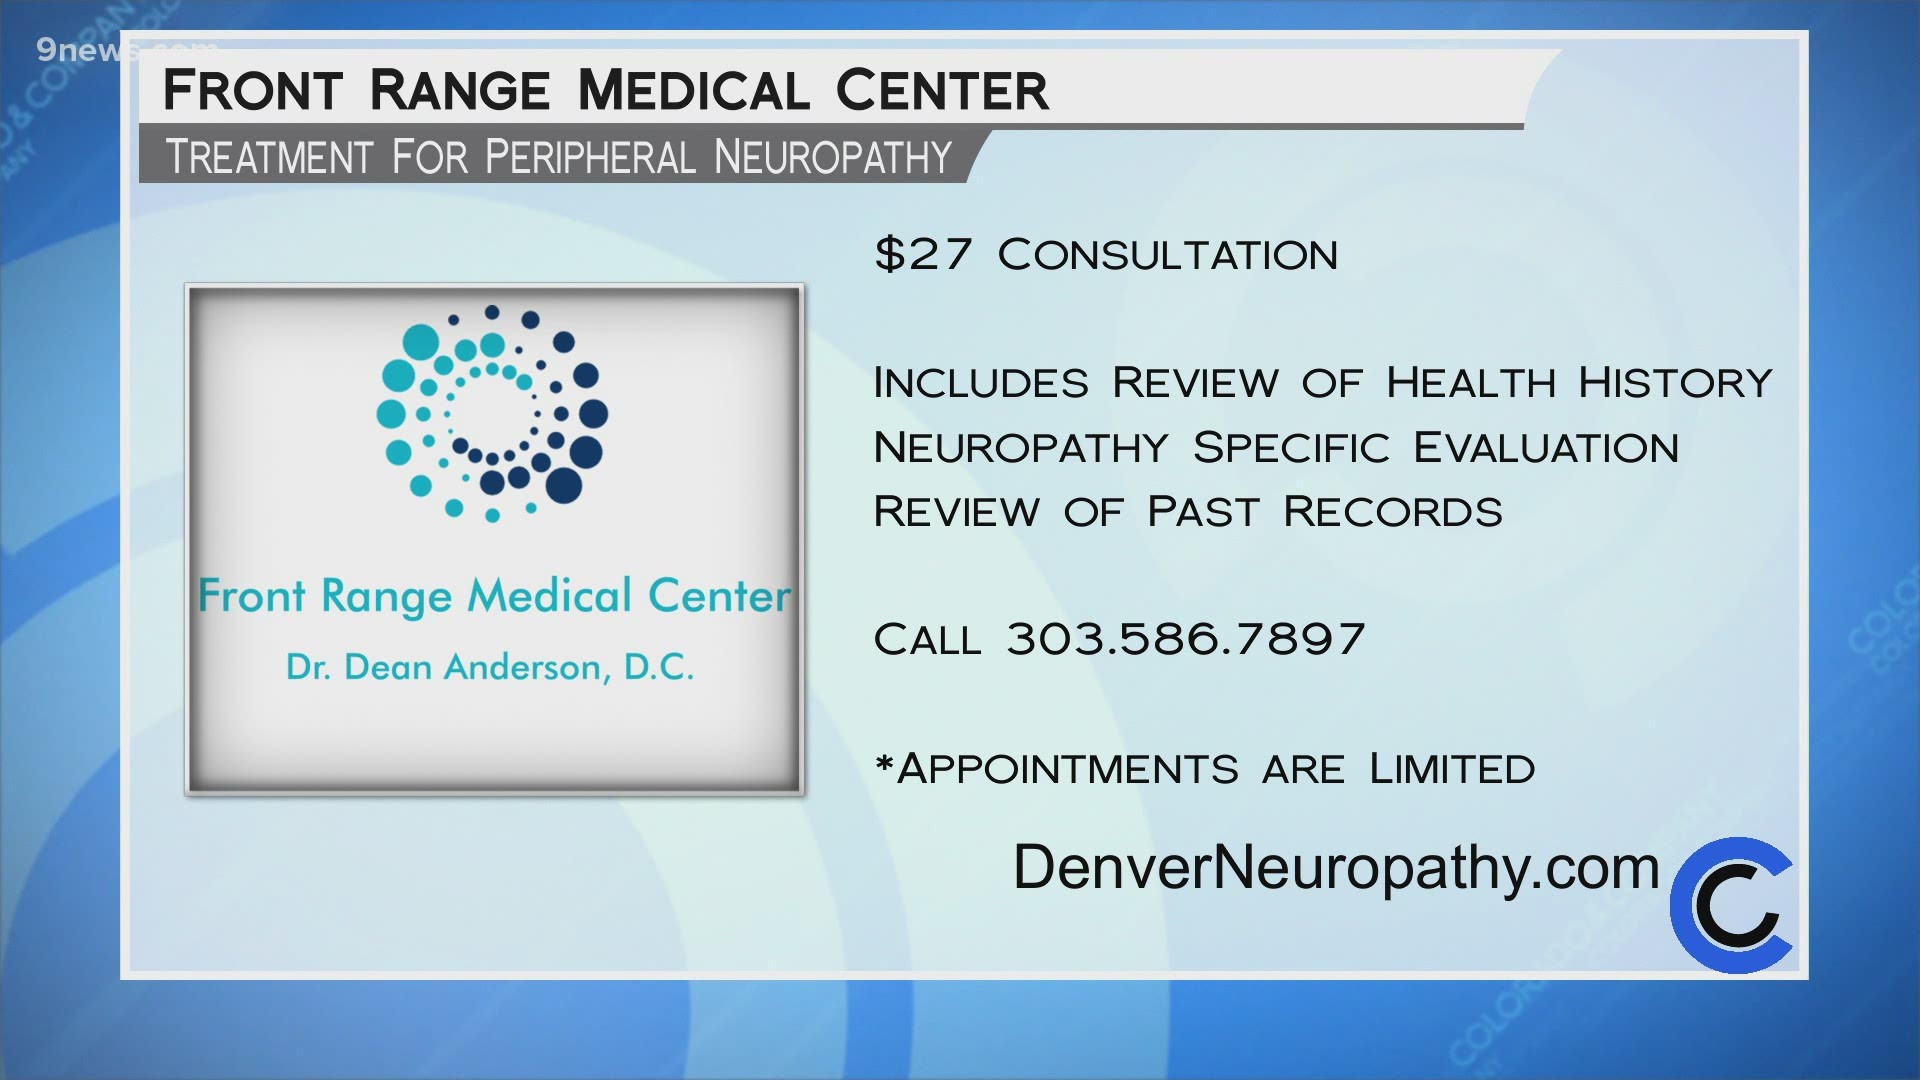 Schedule your $27 consultation at Front Range Medical Center today by calling 303.586.7897. Learn more at DenverNeuropathy.com.